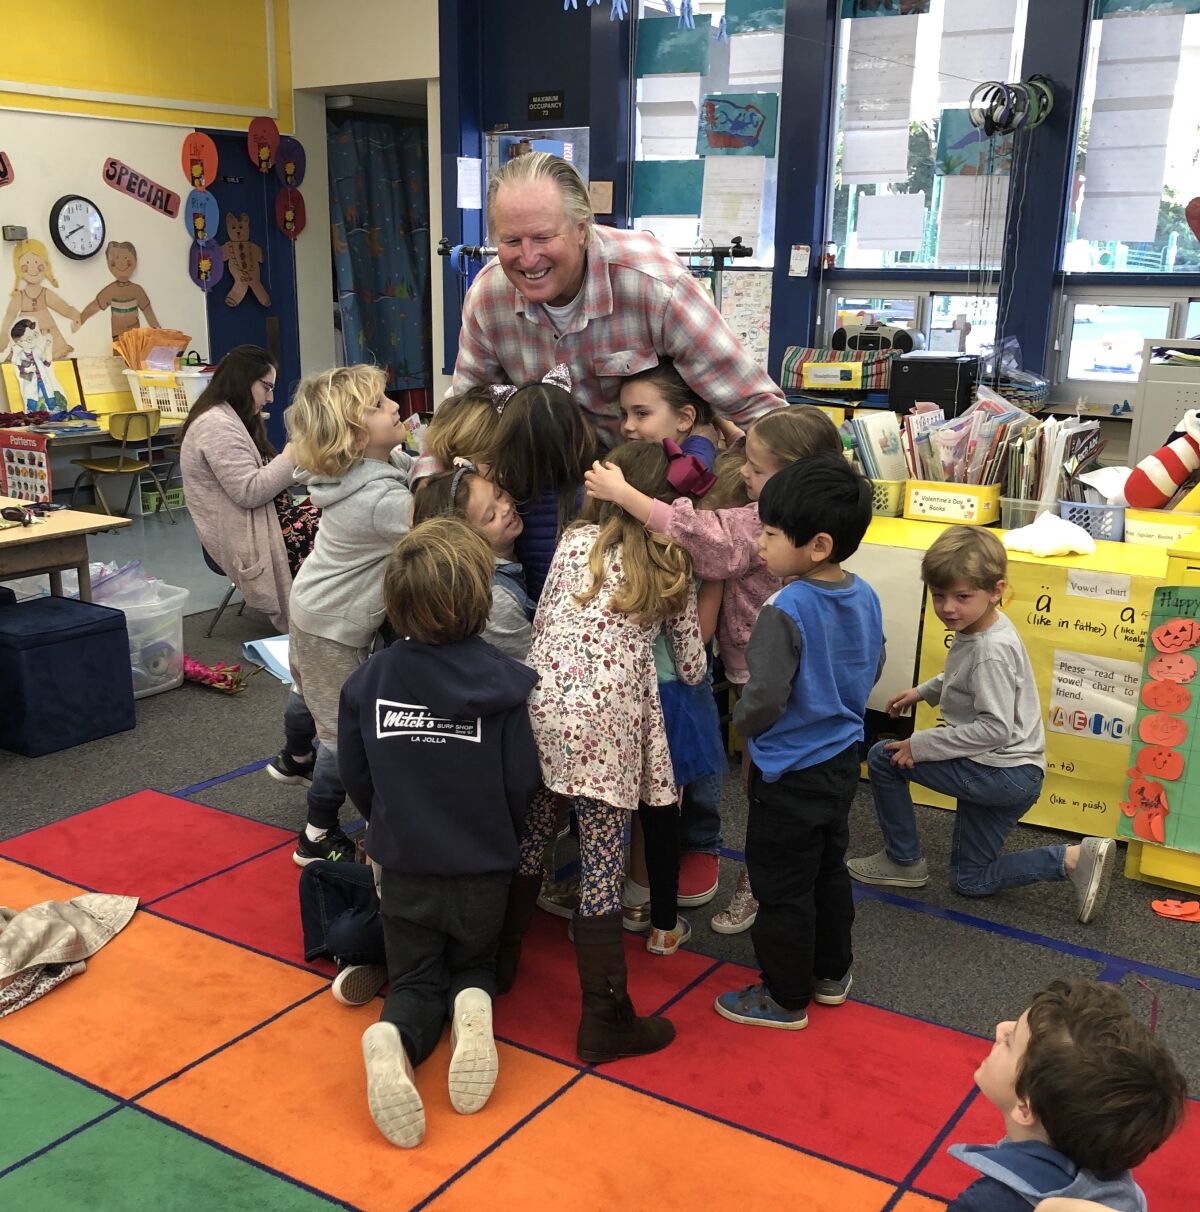 Hugh Carpenter loved working with the students at La Jolla Elementary School. The affection went both ways.